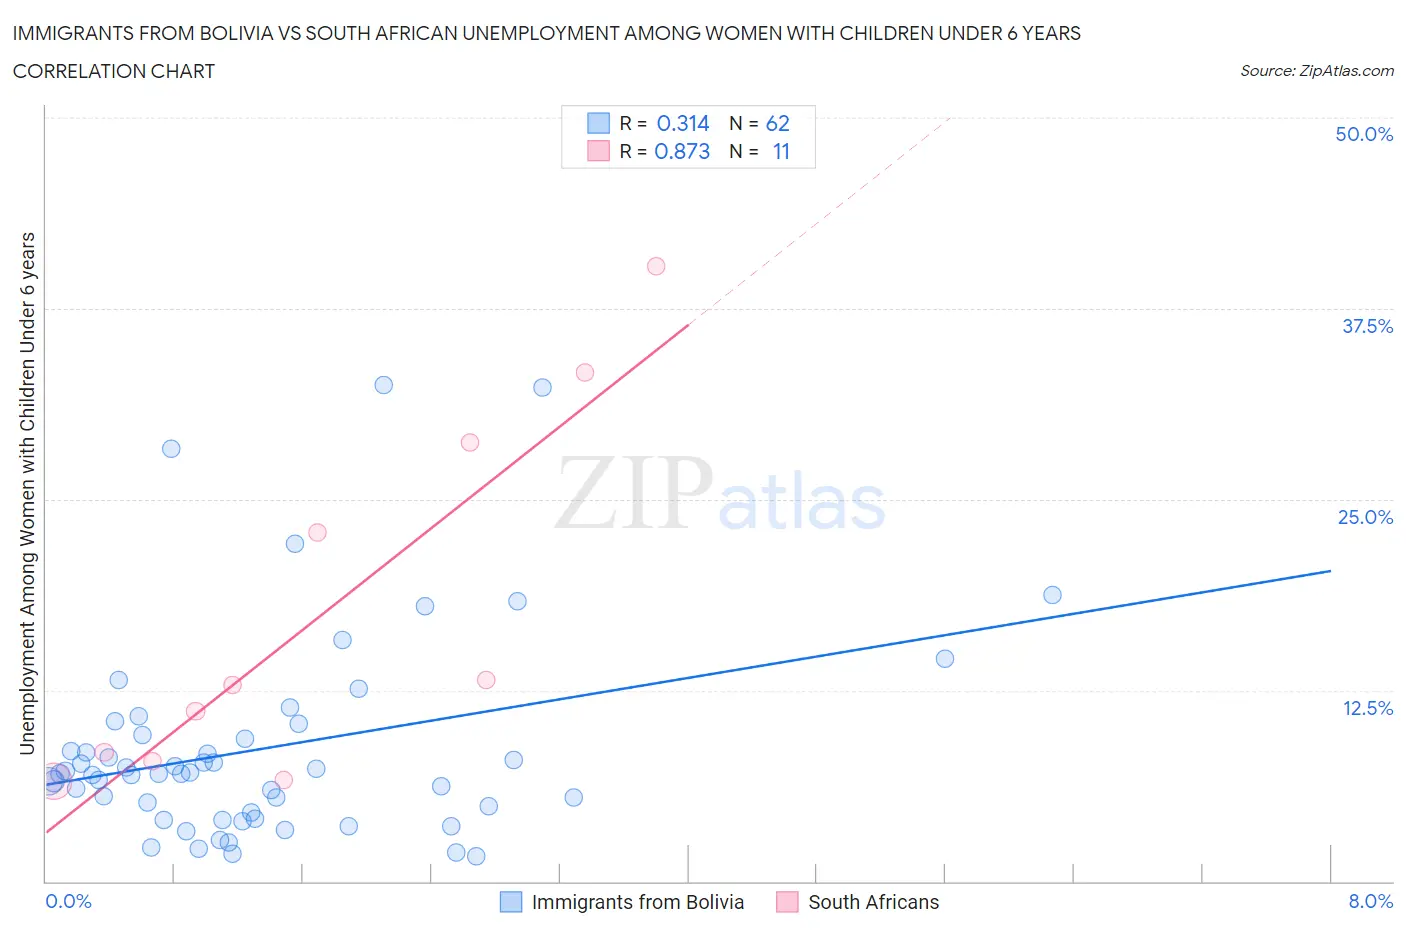 Immigrants from Bolivia vs South African Unemployment Among Women with Children Under 6 years